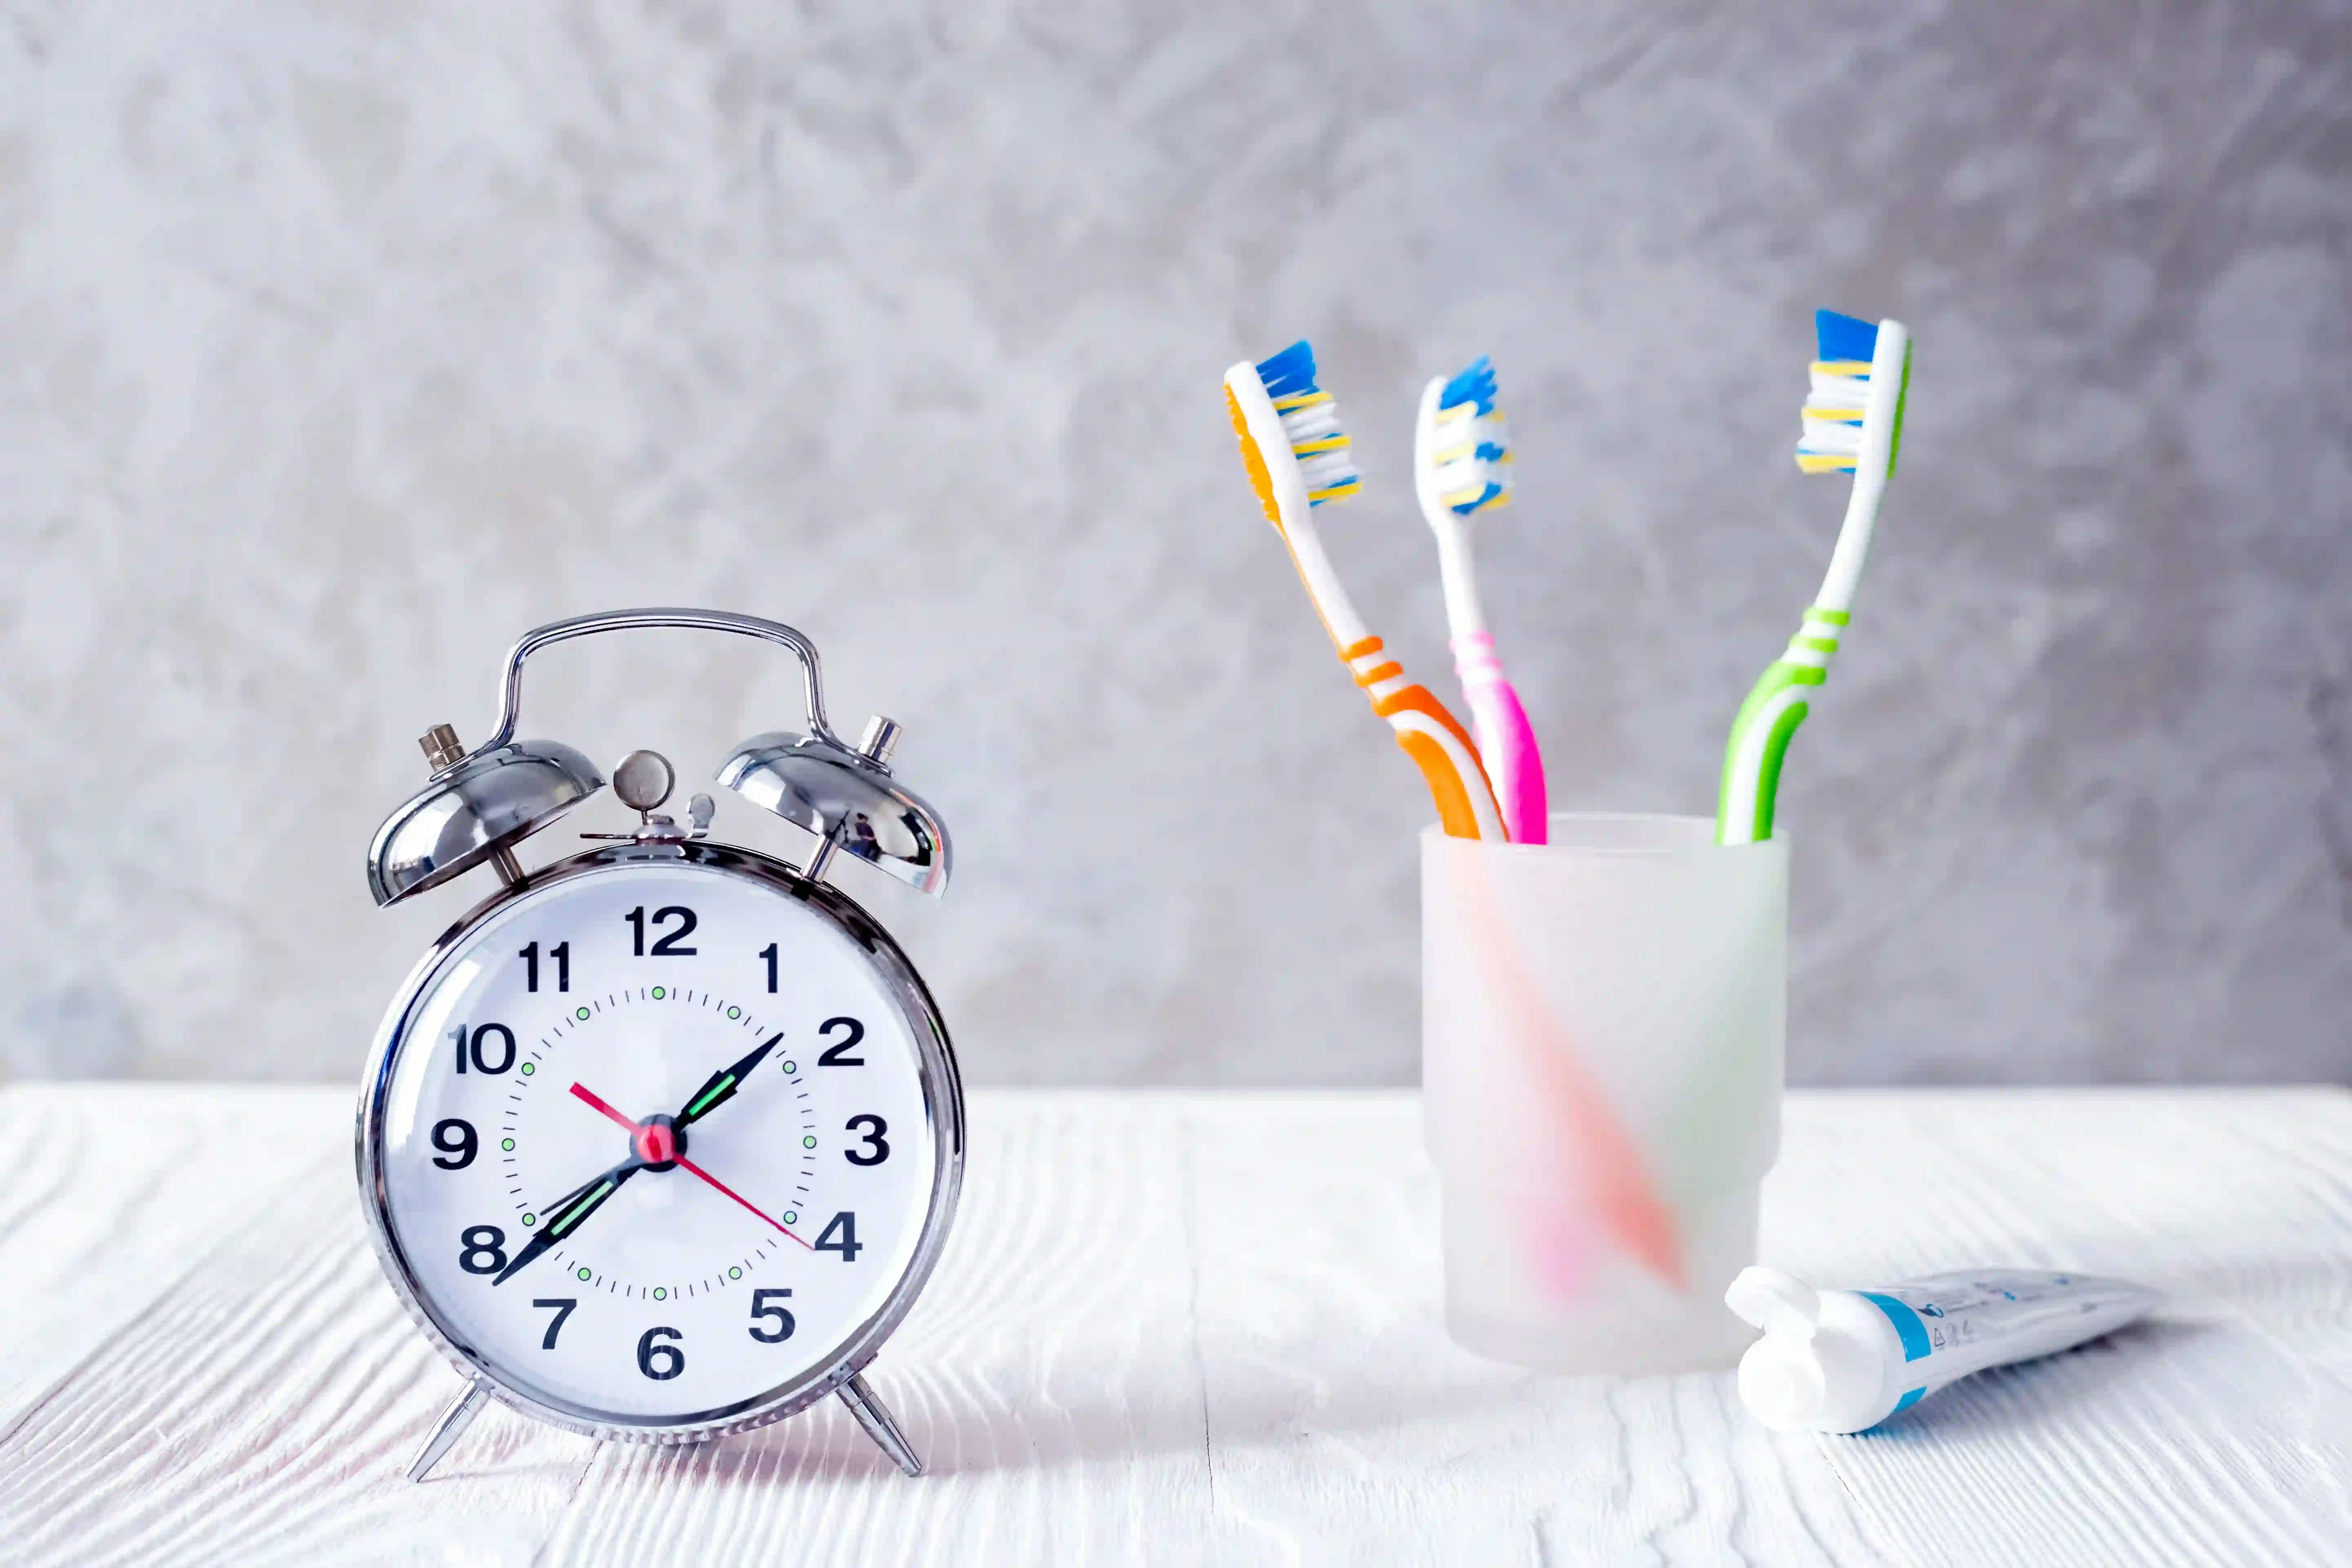 A clock and cup with toothbrushes